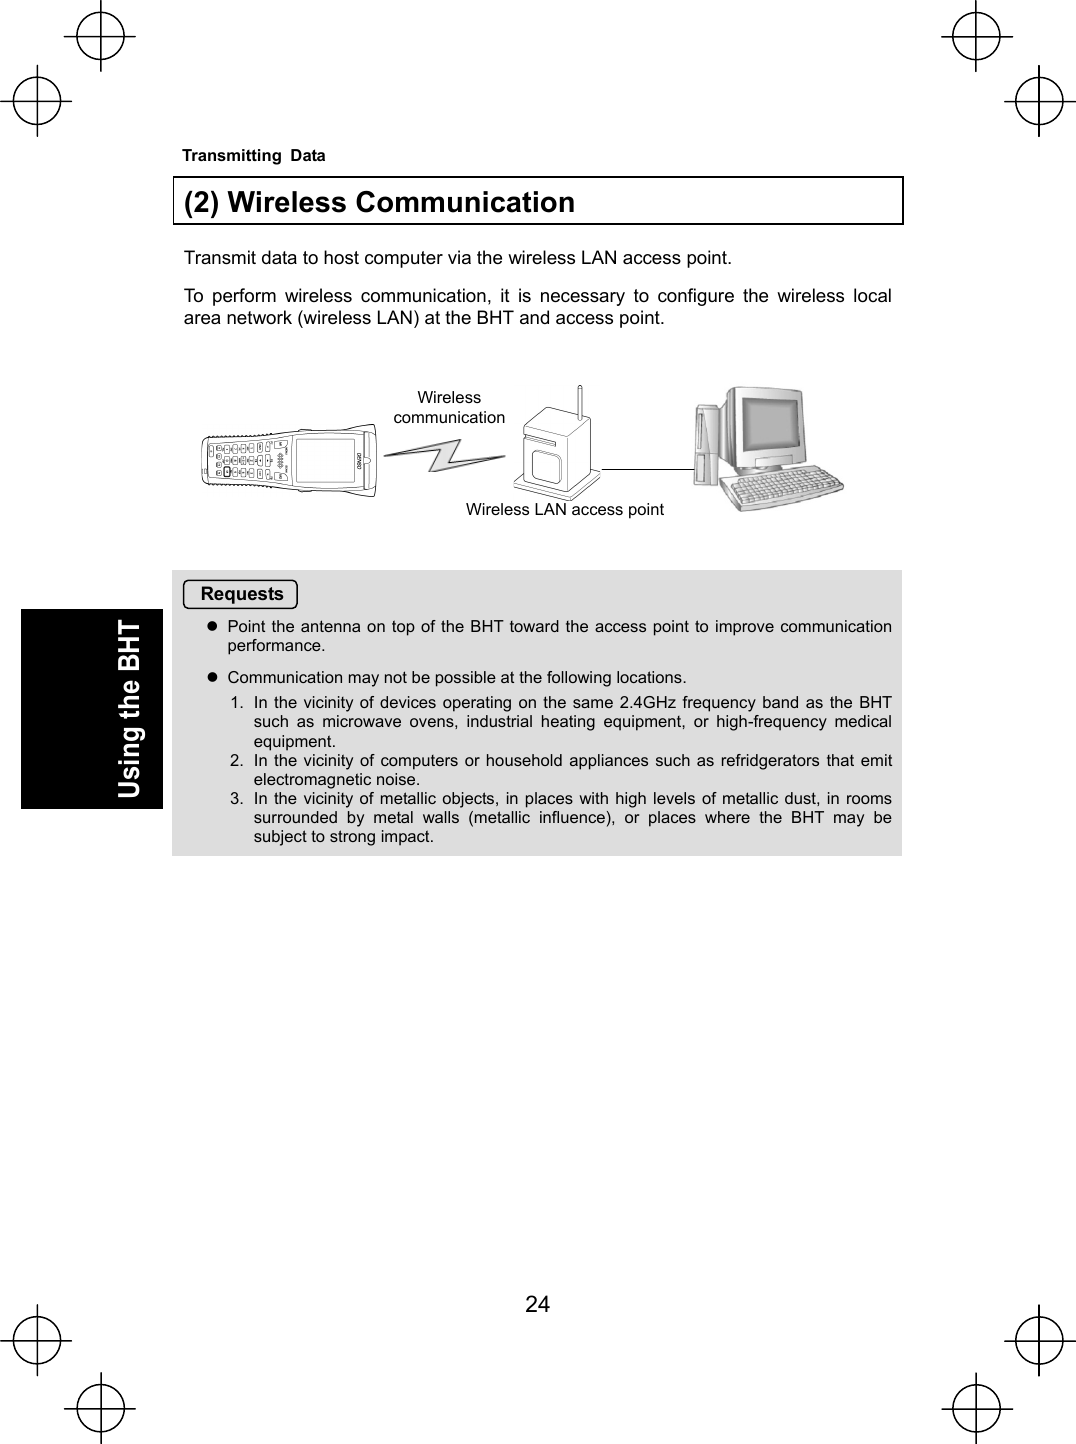  24   Using the BHT  (2) Wireless Communication  Transmit data to host computer via the wireless LAN access point. To perform wireless communication, it is necessary to configure the wireless local area network (wireless LAN) at the BHT and access point.        Requests zPoint the antenna on top of the BHT toward the access point to improve communication performance. zCommunication may not be possible at the following locations. 1.  In the vicinity of devices operating on the same 2.4GHz frequency band as the BHT such as microwave ovens, industrial heating equipment, or high-frequency medical equipment. 2.  In the vicinity of computers or household appliances such as refridgerators that emit electromagnetic noise. 3.  In the vicinity of metallic objects, in places with high levels of metallic dust, in rooms surrounded by metal walls (metallic influence), or places where the BHT may be subject to strong impact.    Wireless  communicationWireless LAN access pointTransmitting Data 